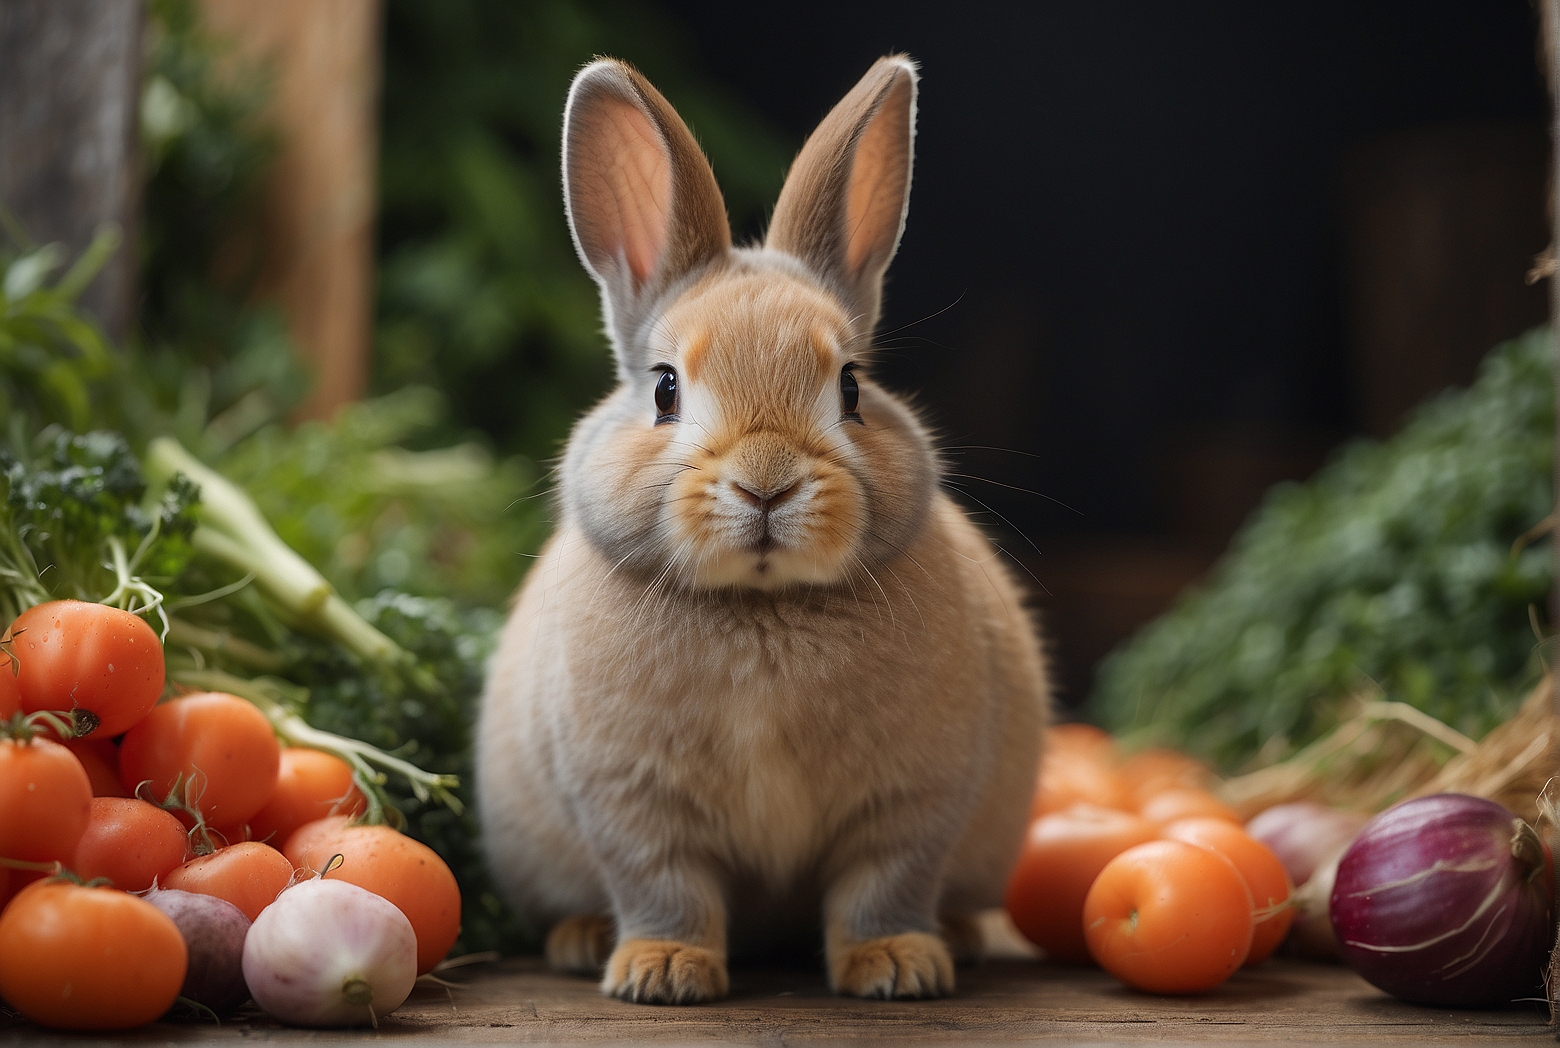 A Guide to Vegetables for Netherland Dwarf Rabbits